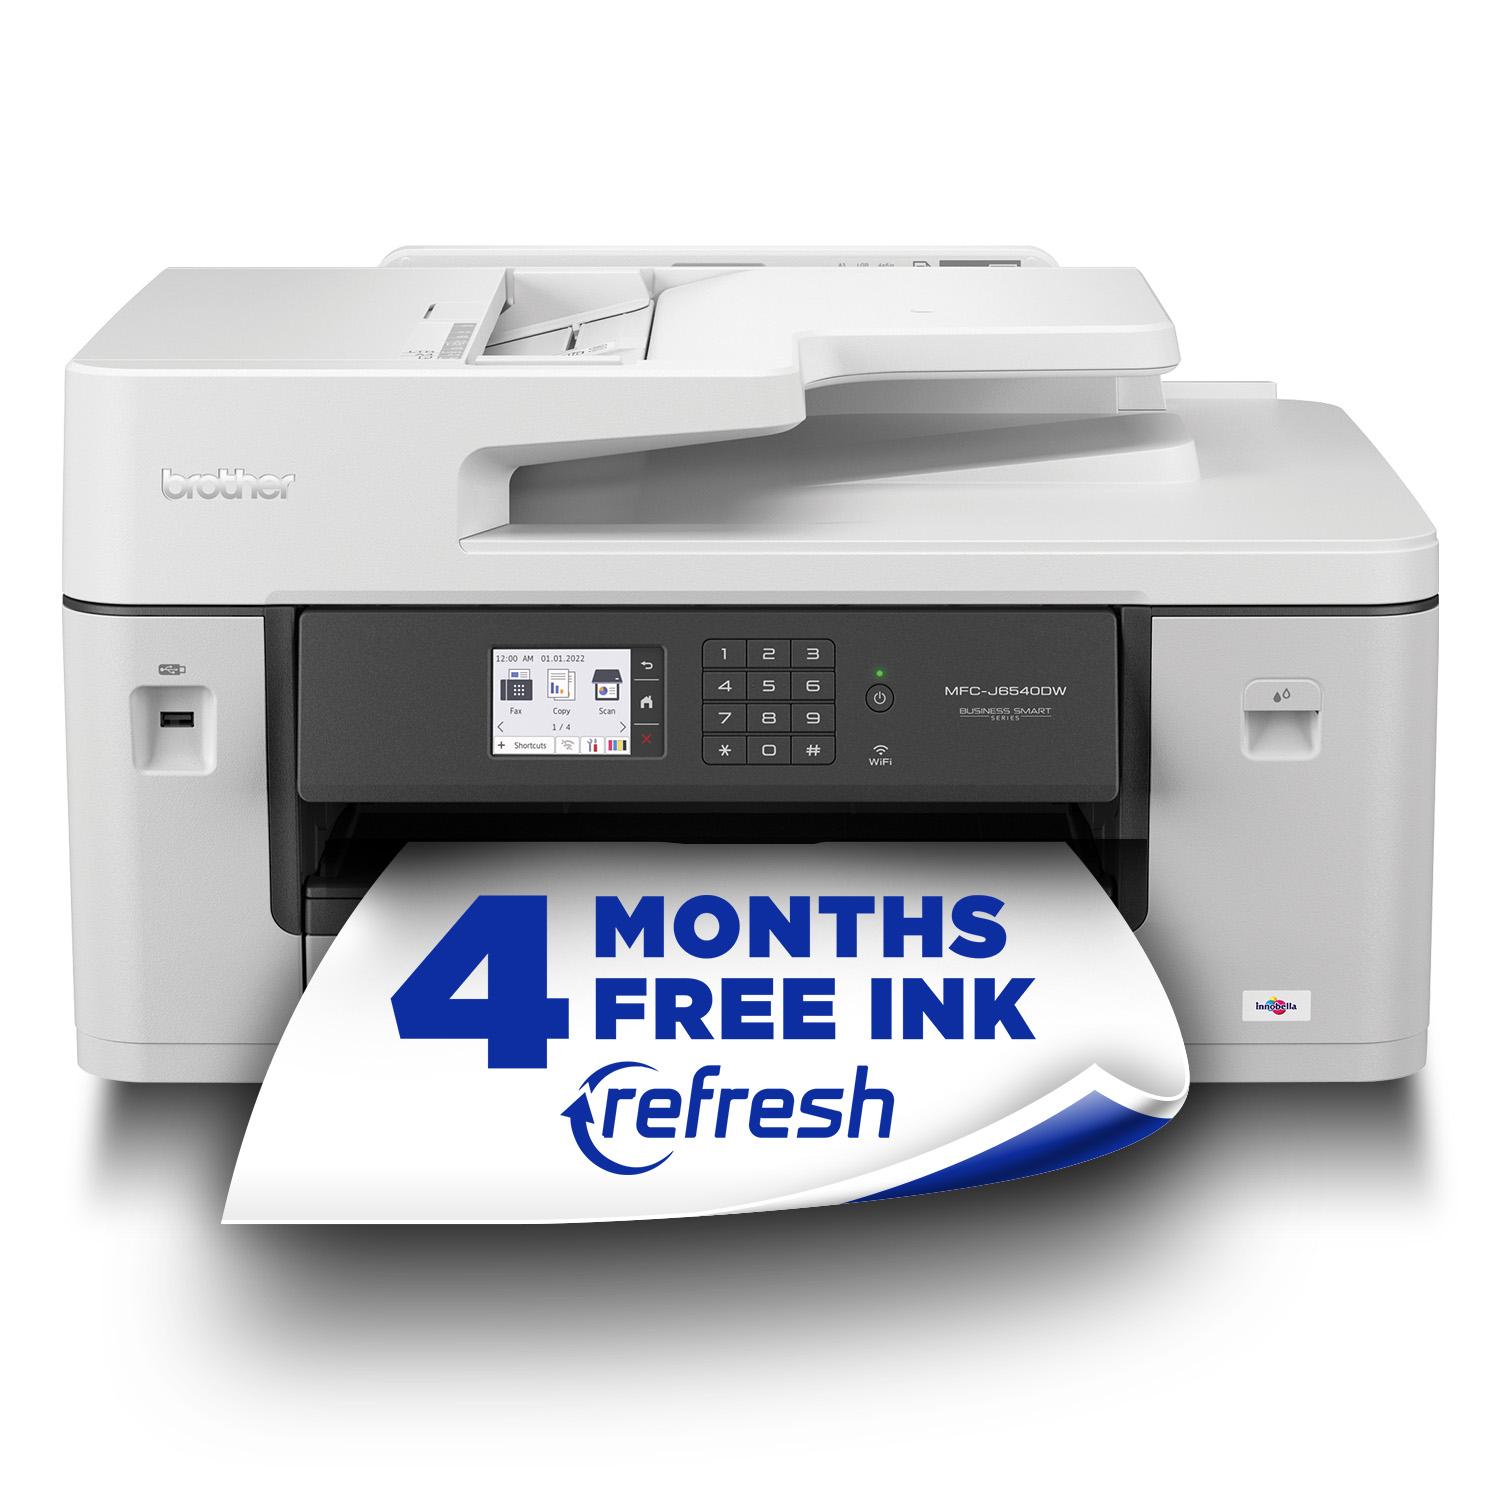 

Brother MFC-J6540DW Business Color Inkjet All-in-One Printer – print, scan, copy and fax up to 11"x17" (Ledger) size paper with 4 Months